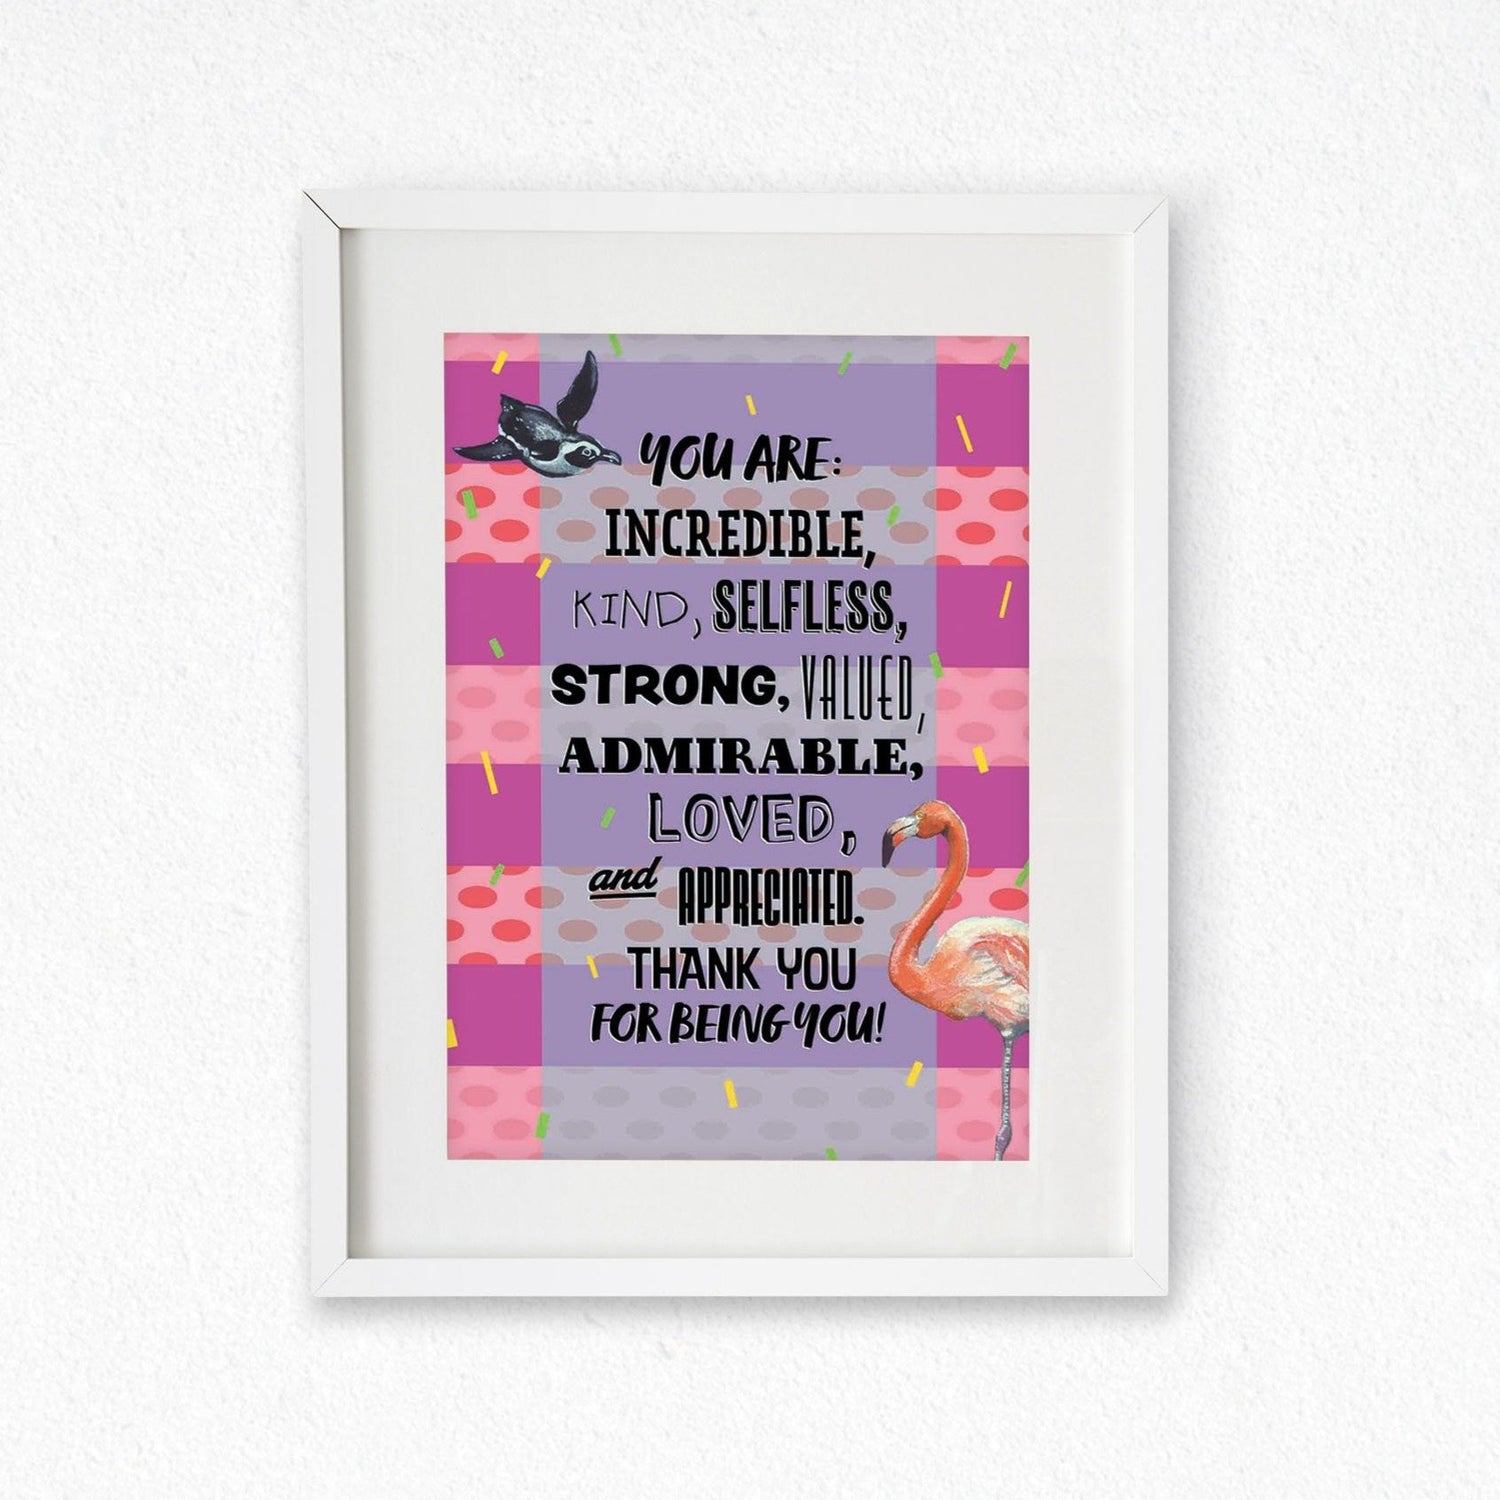 Framed mock up of an A4 Print featuring a design (with a striped background of alternating pink stripes with pale pink and coral spotted stripes, yellow and green confetti lines fall down the page, and a light blue wide transparent strip down the centre backs the wording 'You are: incredible, kind, selfless, strong, valued, admirable, loved, and appreciated. Thank you for being you!' A penguin is top left, and a flamingo is bottom right) from the Positivity Collection by Jenny Pond, JPArtwork